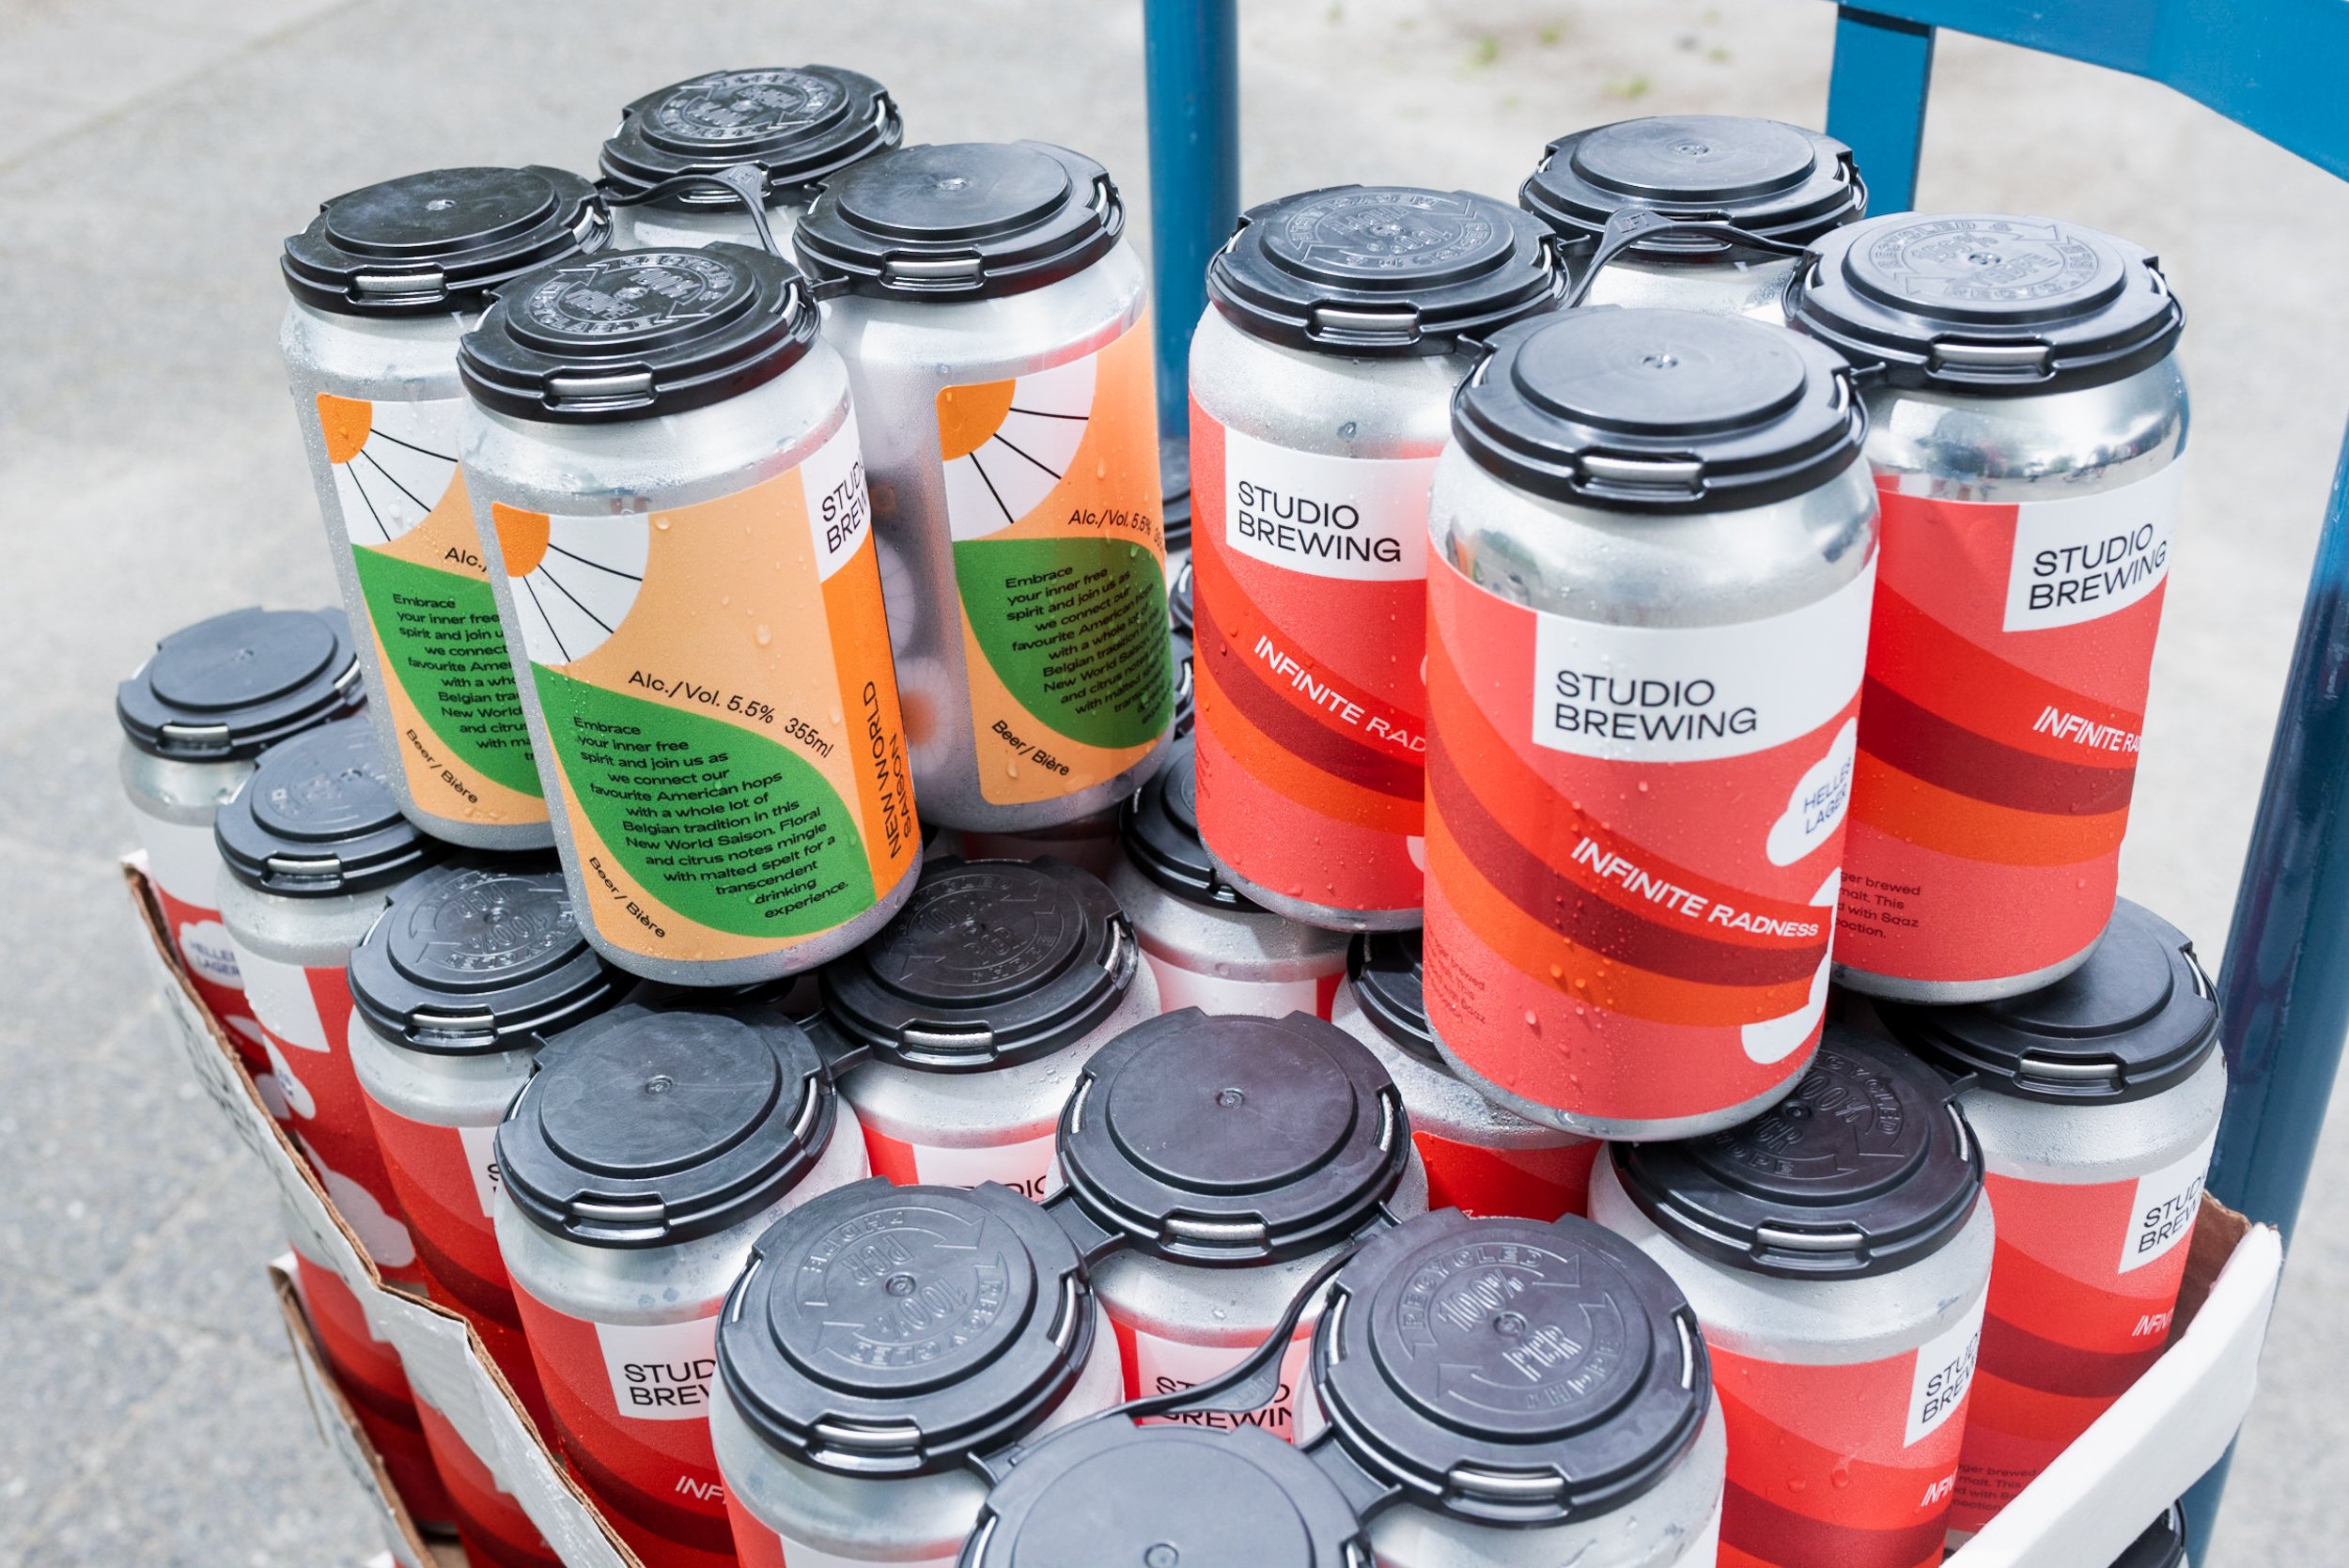 Stack of cans from Studio Brewing